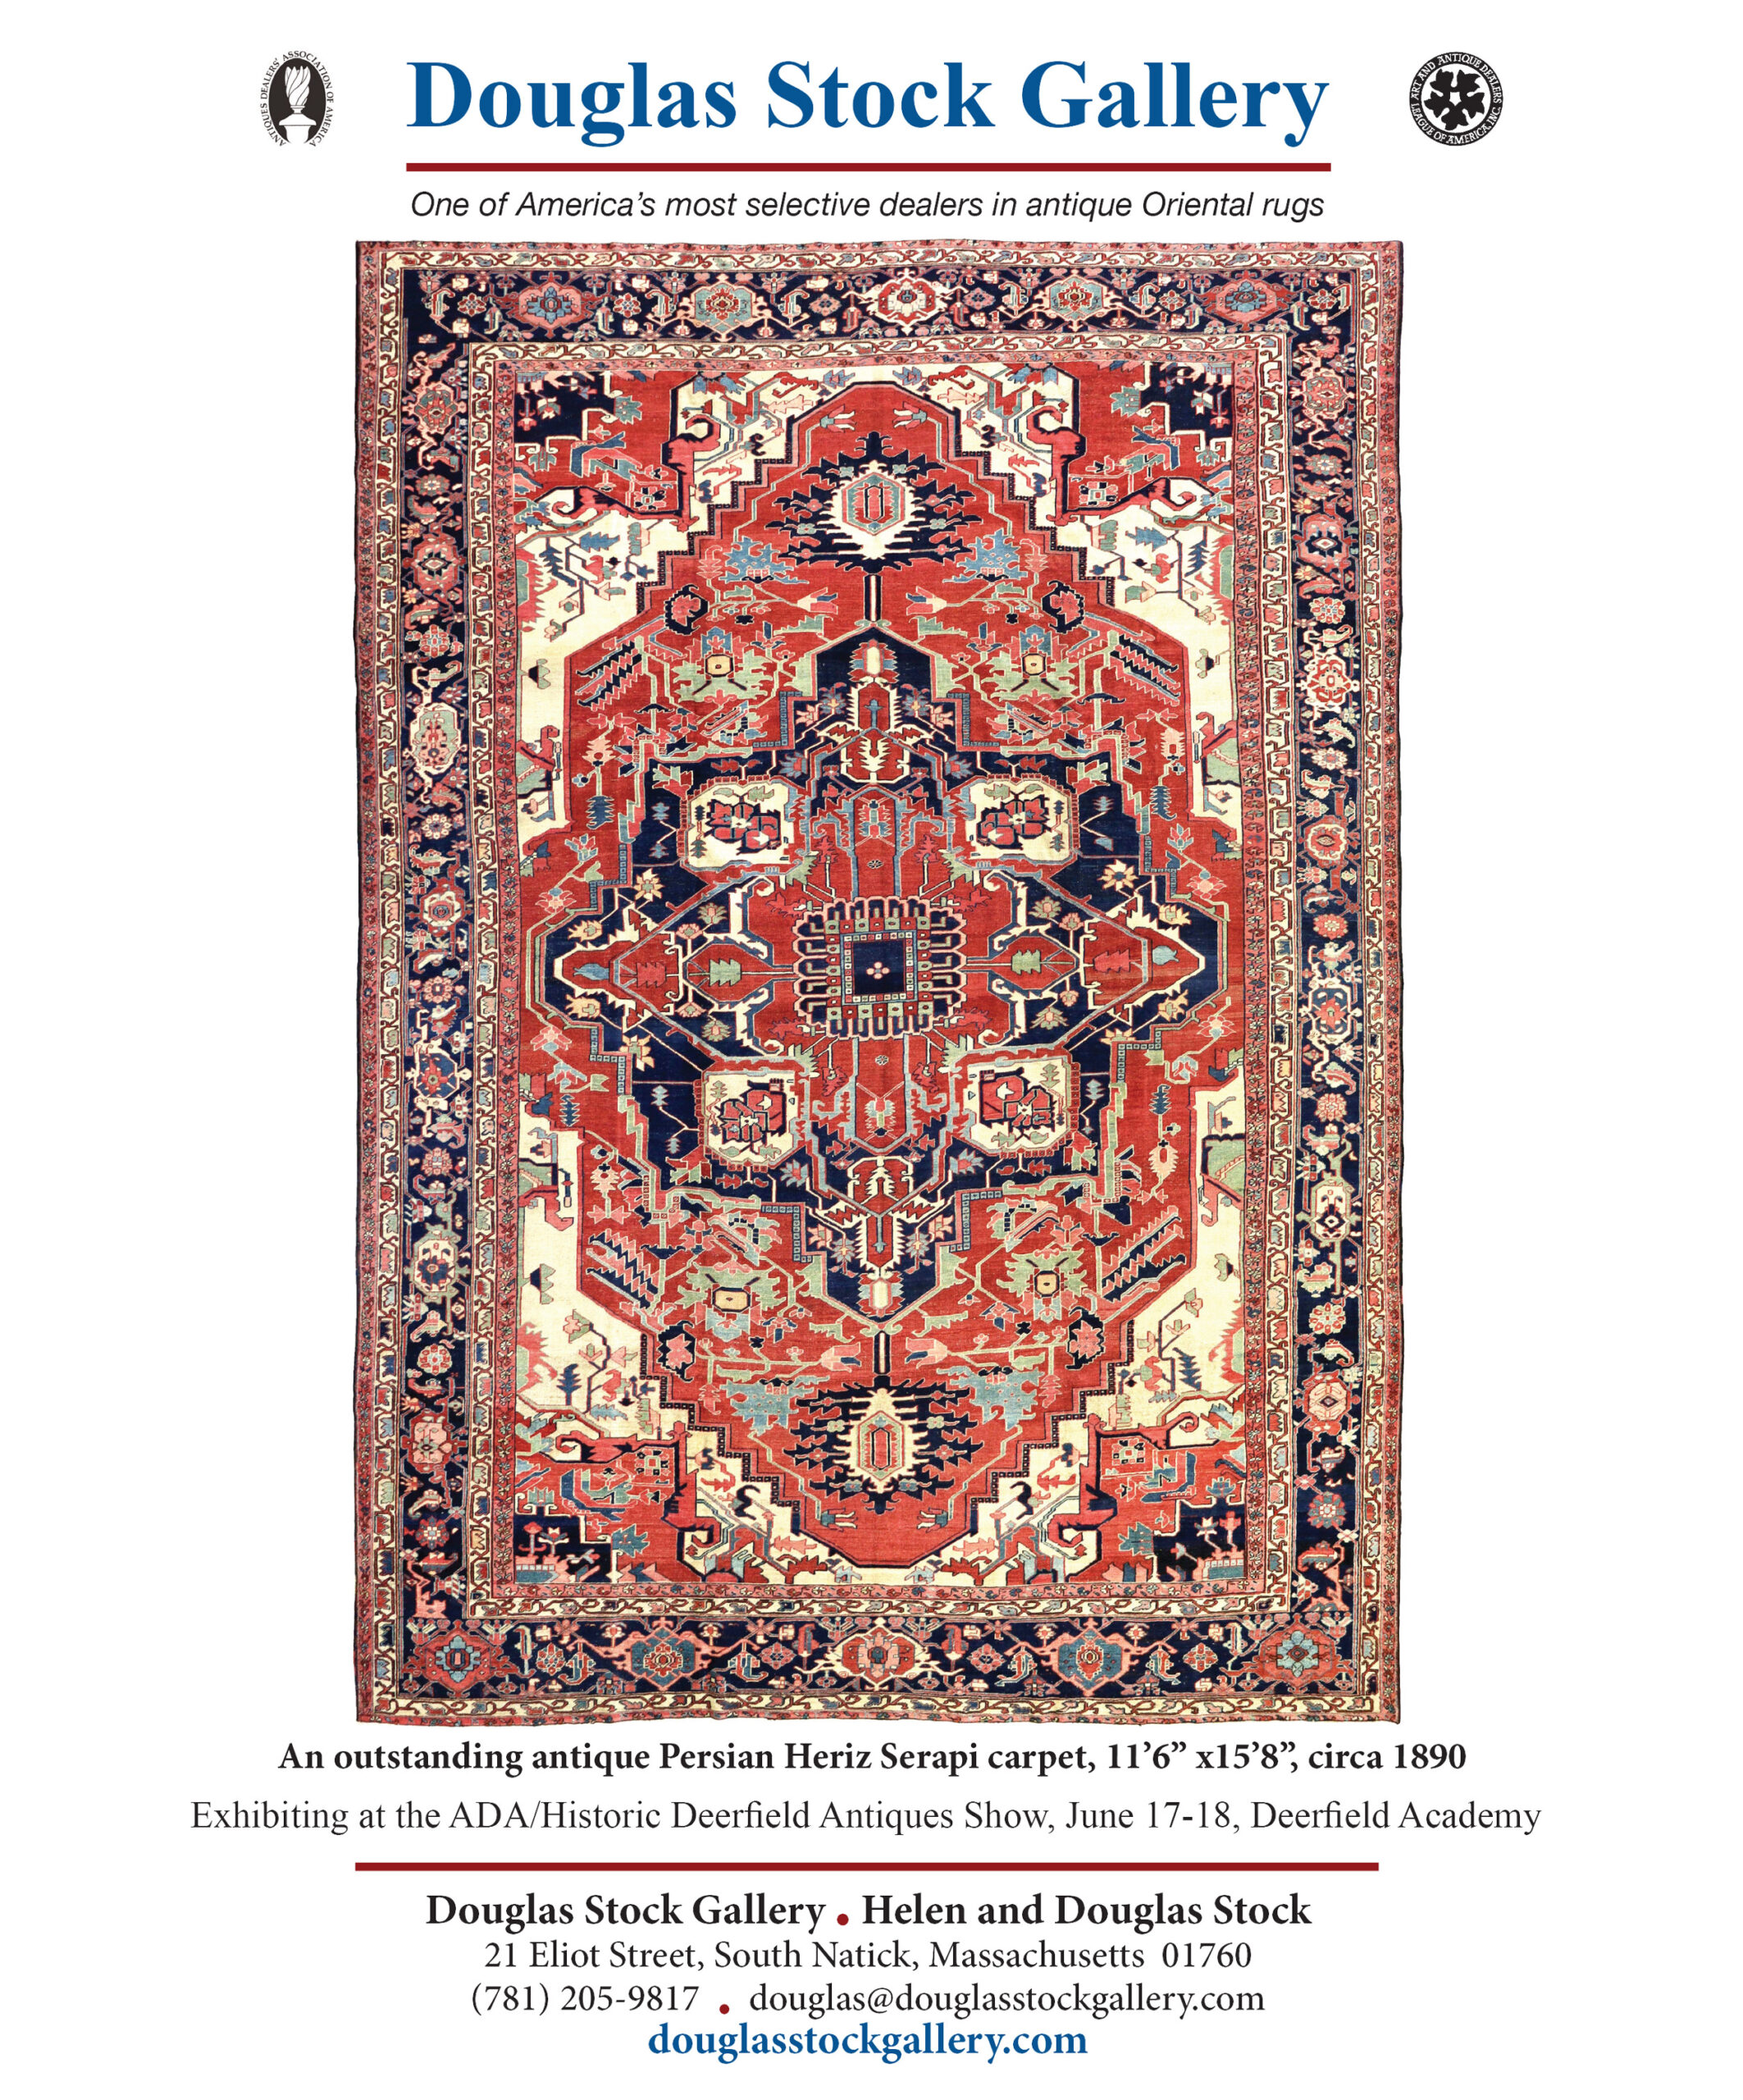 Douglas Stock Gallery is a Boston,MA area based dealer specializing in highly select antique Oriental rugs and Persian carpets. This over size antique Heriz carpet, of the age and caliber often referred to as an antique "Serapi carpet" was published in the May / Jun 2023 issue of The Magazine Antiques.